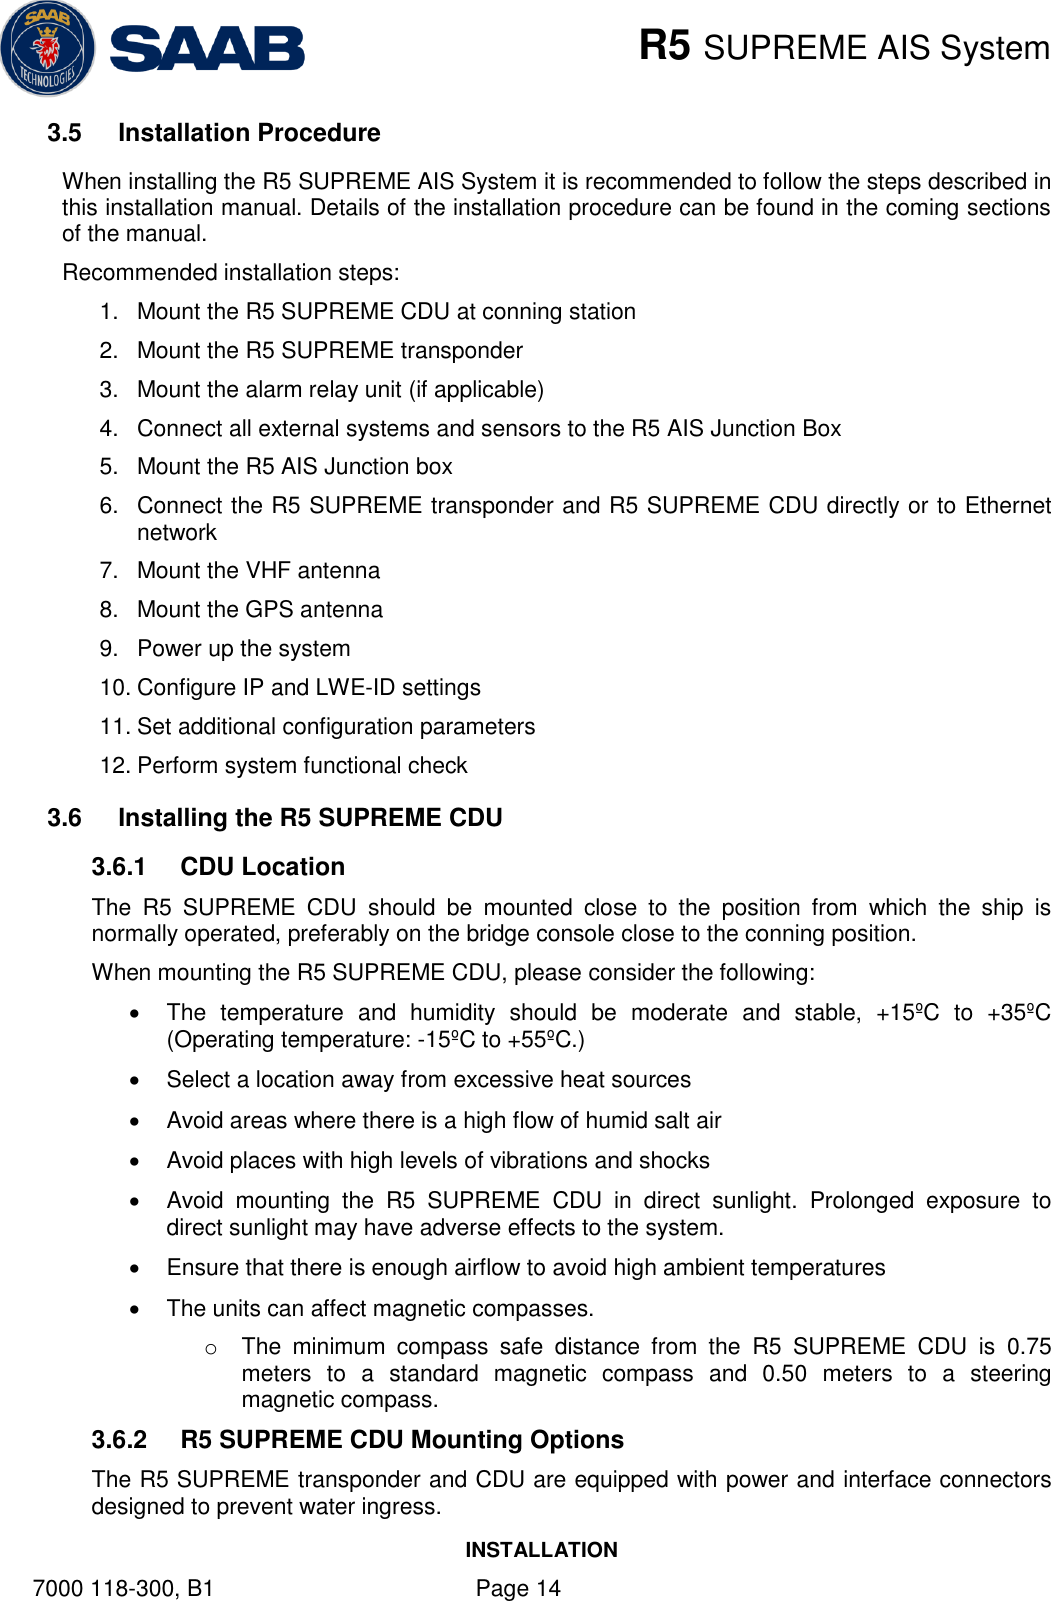    R5 SUPREME AIS System INSTALLATION 7000 118-300, B1    Page 14 3.5  Installation Procedure When installing the R5 SUPREME AIS System it is recommended to follow the steps described in this installation manual. Details of the installation procedure can be found in the coming sections of the manual. Recommended installation steps: 1.  Mount the R5 SUPREME CDU at conning station 2.  Mount the R5 SUPREME transponder 3.  Mount the alarm relay unit (if applicable) 4.  Connect all external systems and sensors to the R5 AIS Junction Box 5.  Mount the R5 AIS Junction box 6.  Connect the R5 SUPREME transponder and R5 SUPREME CDU directly or to Ethernet network 7.  Mount the VHF antenna 8.  Mount the GPS antenna 9.  Power up the system 10. Configure IP and LWE-ID settings 11. Set additional configuration parameters 12. Perform system functional check 3.6  Installing the R5 SUPREME CDU 3.6.1  CDU Location The  R5  SUPREME  CDU  should  be  mounted  close  to  the  position  from  which  the  ship  is normally operated, preferably on the bridge console close to the conning position. When mounting the R5 SUPREME CDU, please consider the following:   The  temperature  and  humidity  should  be  moderate  and  stable,  +15ºC  to  +35ºC (Operating temperature: -15ºC to +55ºC.)   Select a location away from excessive heat sources   Avoid areas where there is a high flow of humid salt air   Avoid places with high levels of vibrations and shocks   Avoid  mounting  the  R5  SUPREME  CDU  in  direct  sunlight.  Prolonged  exposure  to direct sunlight may have adverse effects to the system.   Ensure that there is enough airflow to avoid high ambient temperatures   The units can affect magnetic compasses. o  The  minimum  compass  safe  distance  from  the  R5  SUPREME  CDU  is  0.75 meters  to  a  standard  magnetic  compass  and  0.50  meters  to  a  steering magnetic compass. 3.6.2  R5 SUPREME CDU Mounting Options The R5 SUPREME transponder and CDU are equipped with power and interface connectors designed to prevent water ingress.  